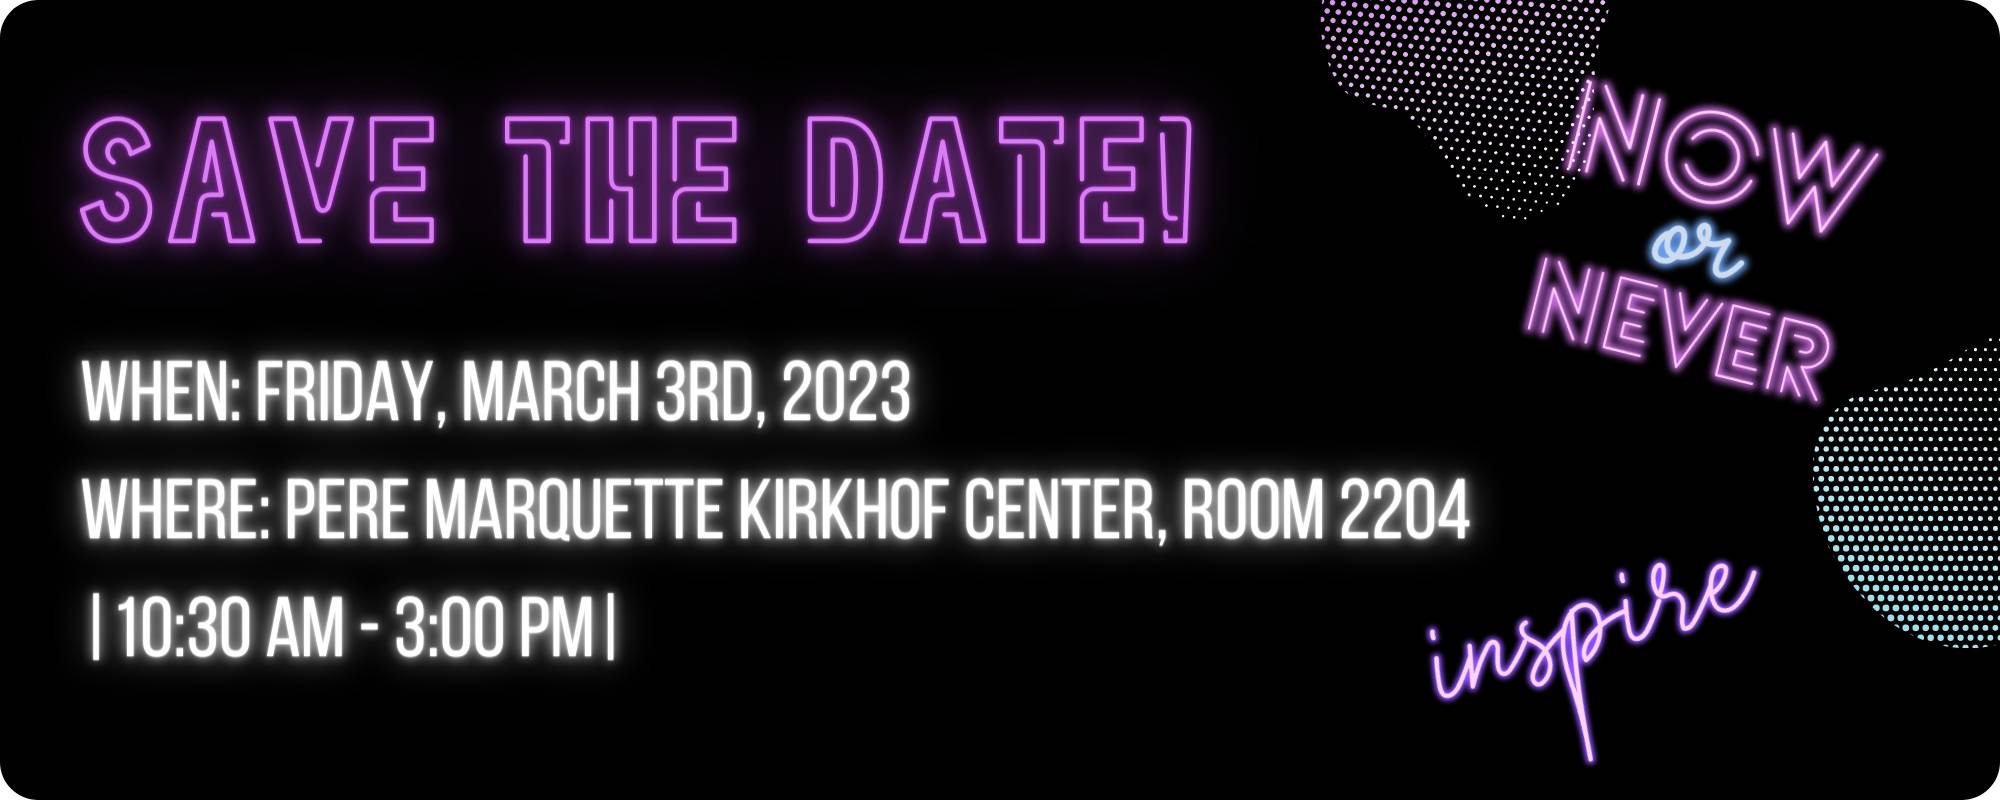 Girls of Color Summit Save the Date! Friday March 3rd, 2023. Pere Marquette Kirkhof Center Room 2204. 10:30 am to 3 pm